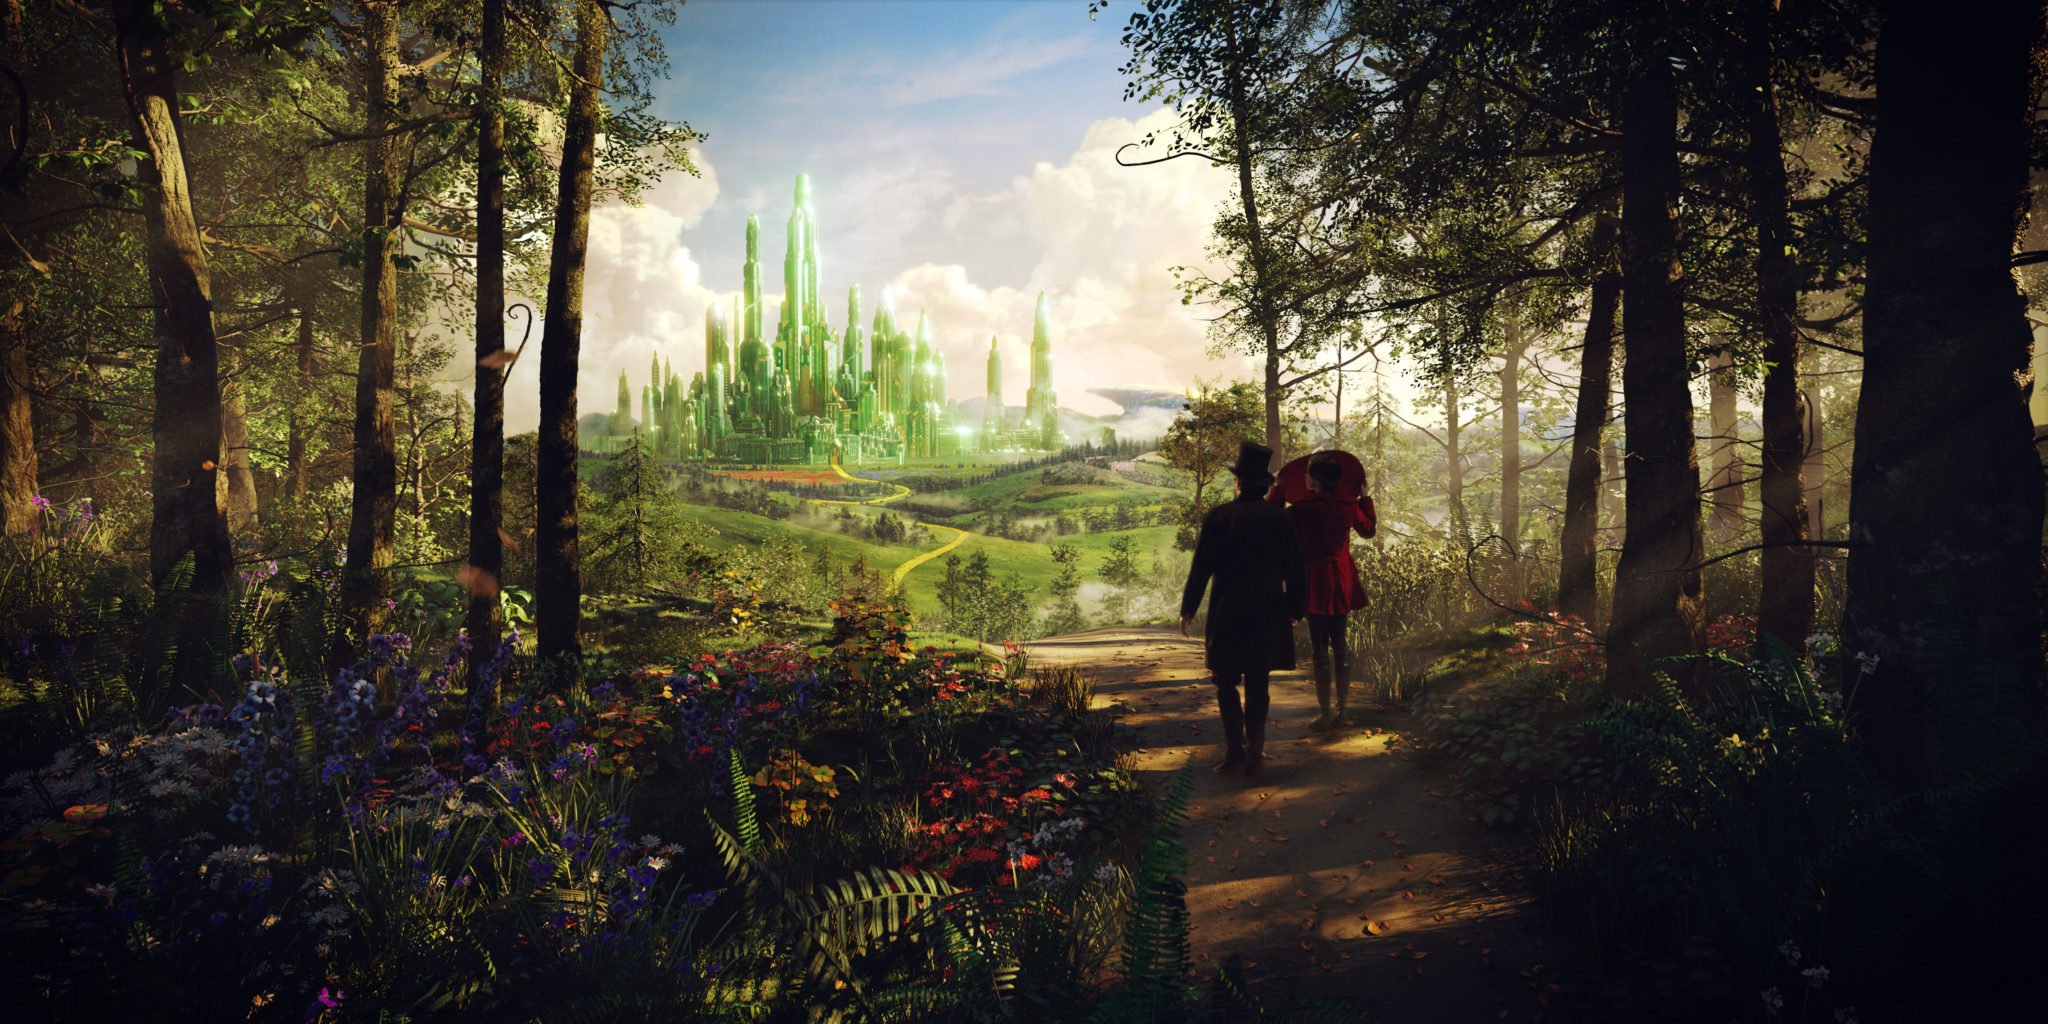 'Oz the Great and Powerful' – Bad CGI Distracts from An Otherwise Decent Film ...2048 x 1024